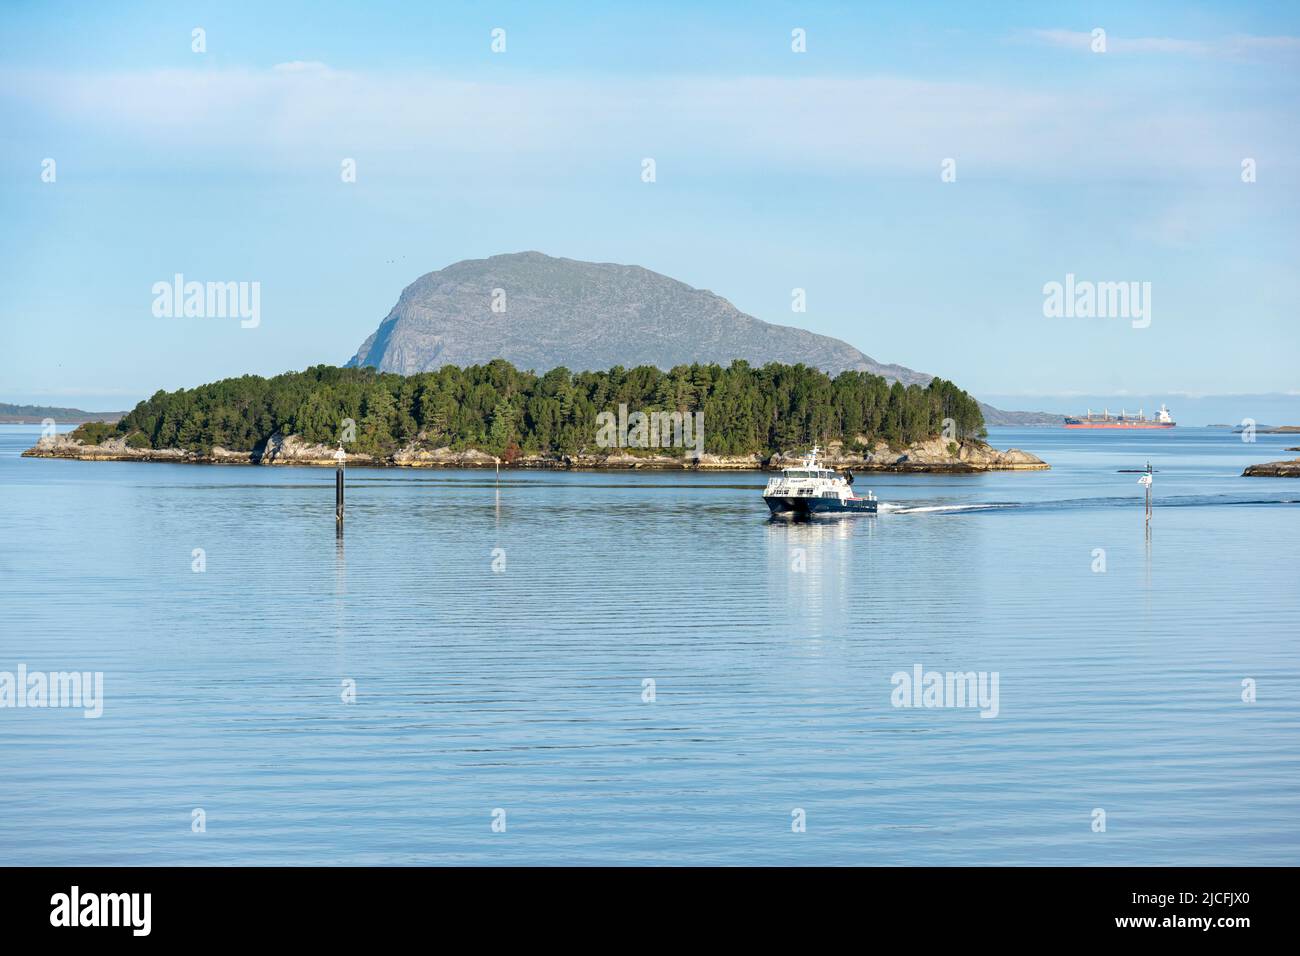 Norway, Vestland, Florø, small forested island in front of the city. Stock Photo